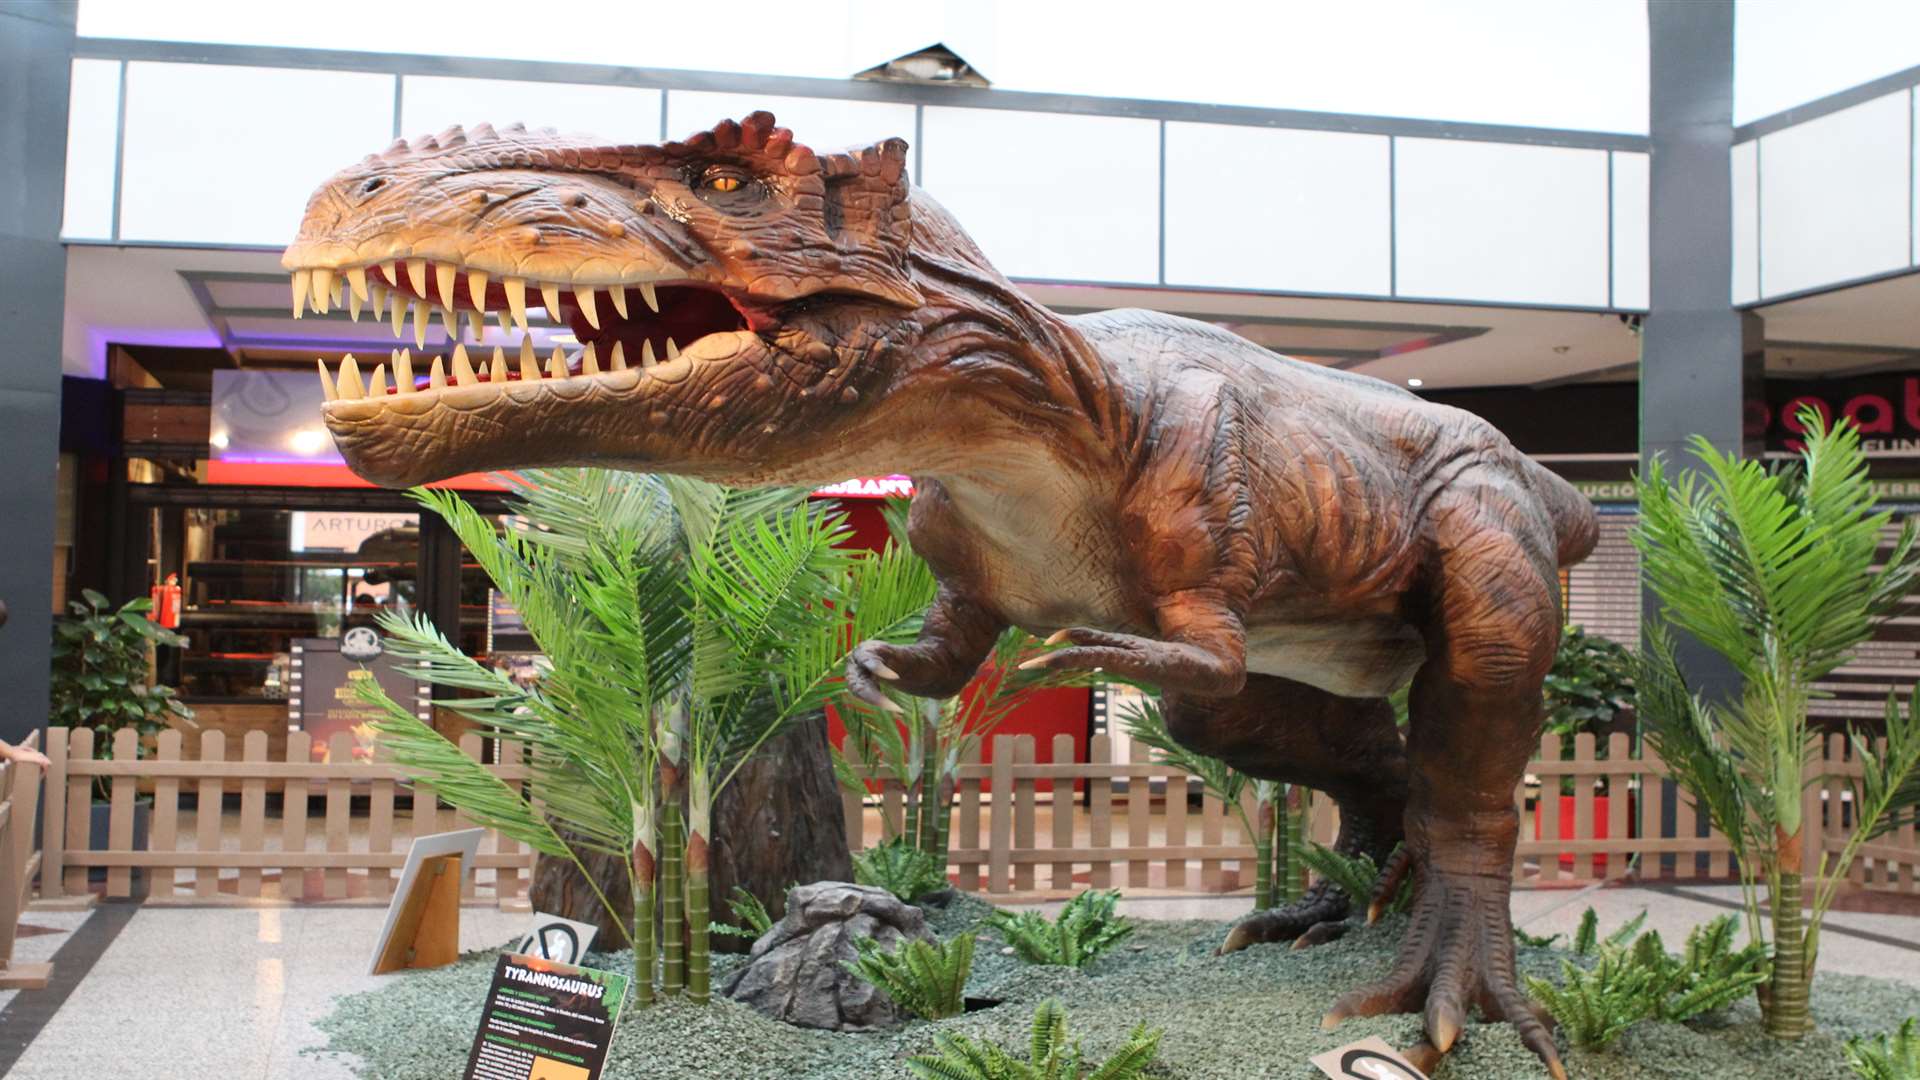 Dino Live is coming to the Royal Victoria Place, Tunbridge Wells